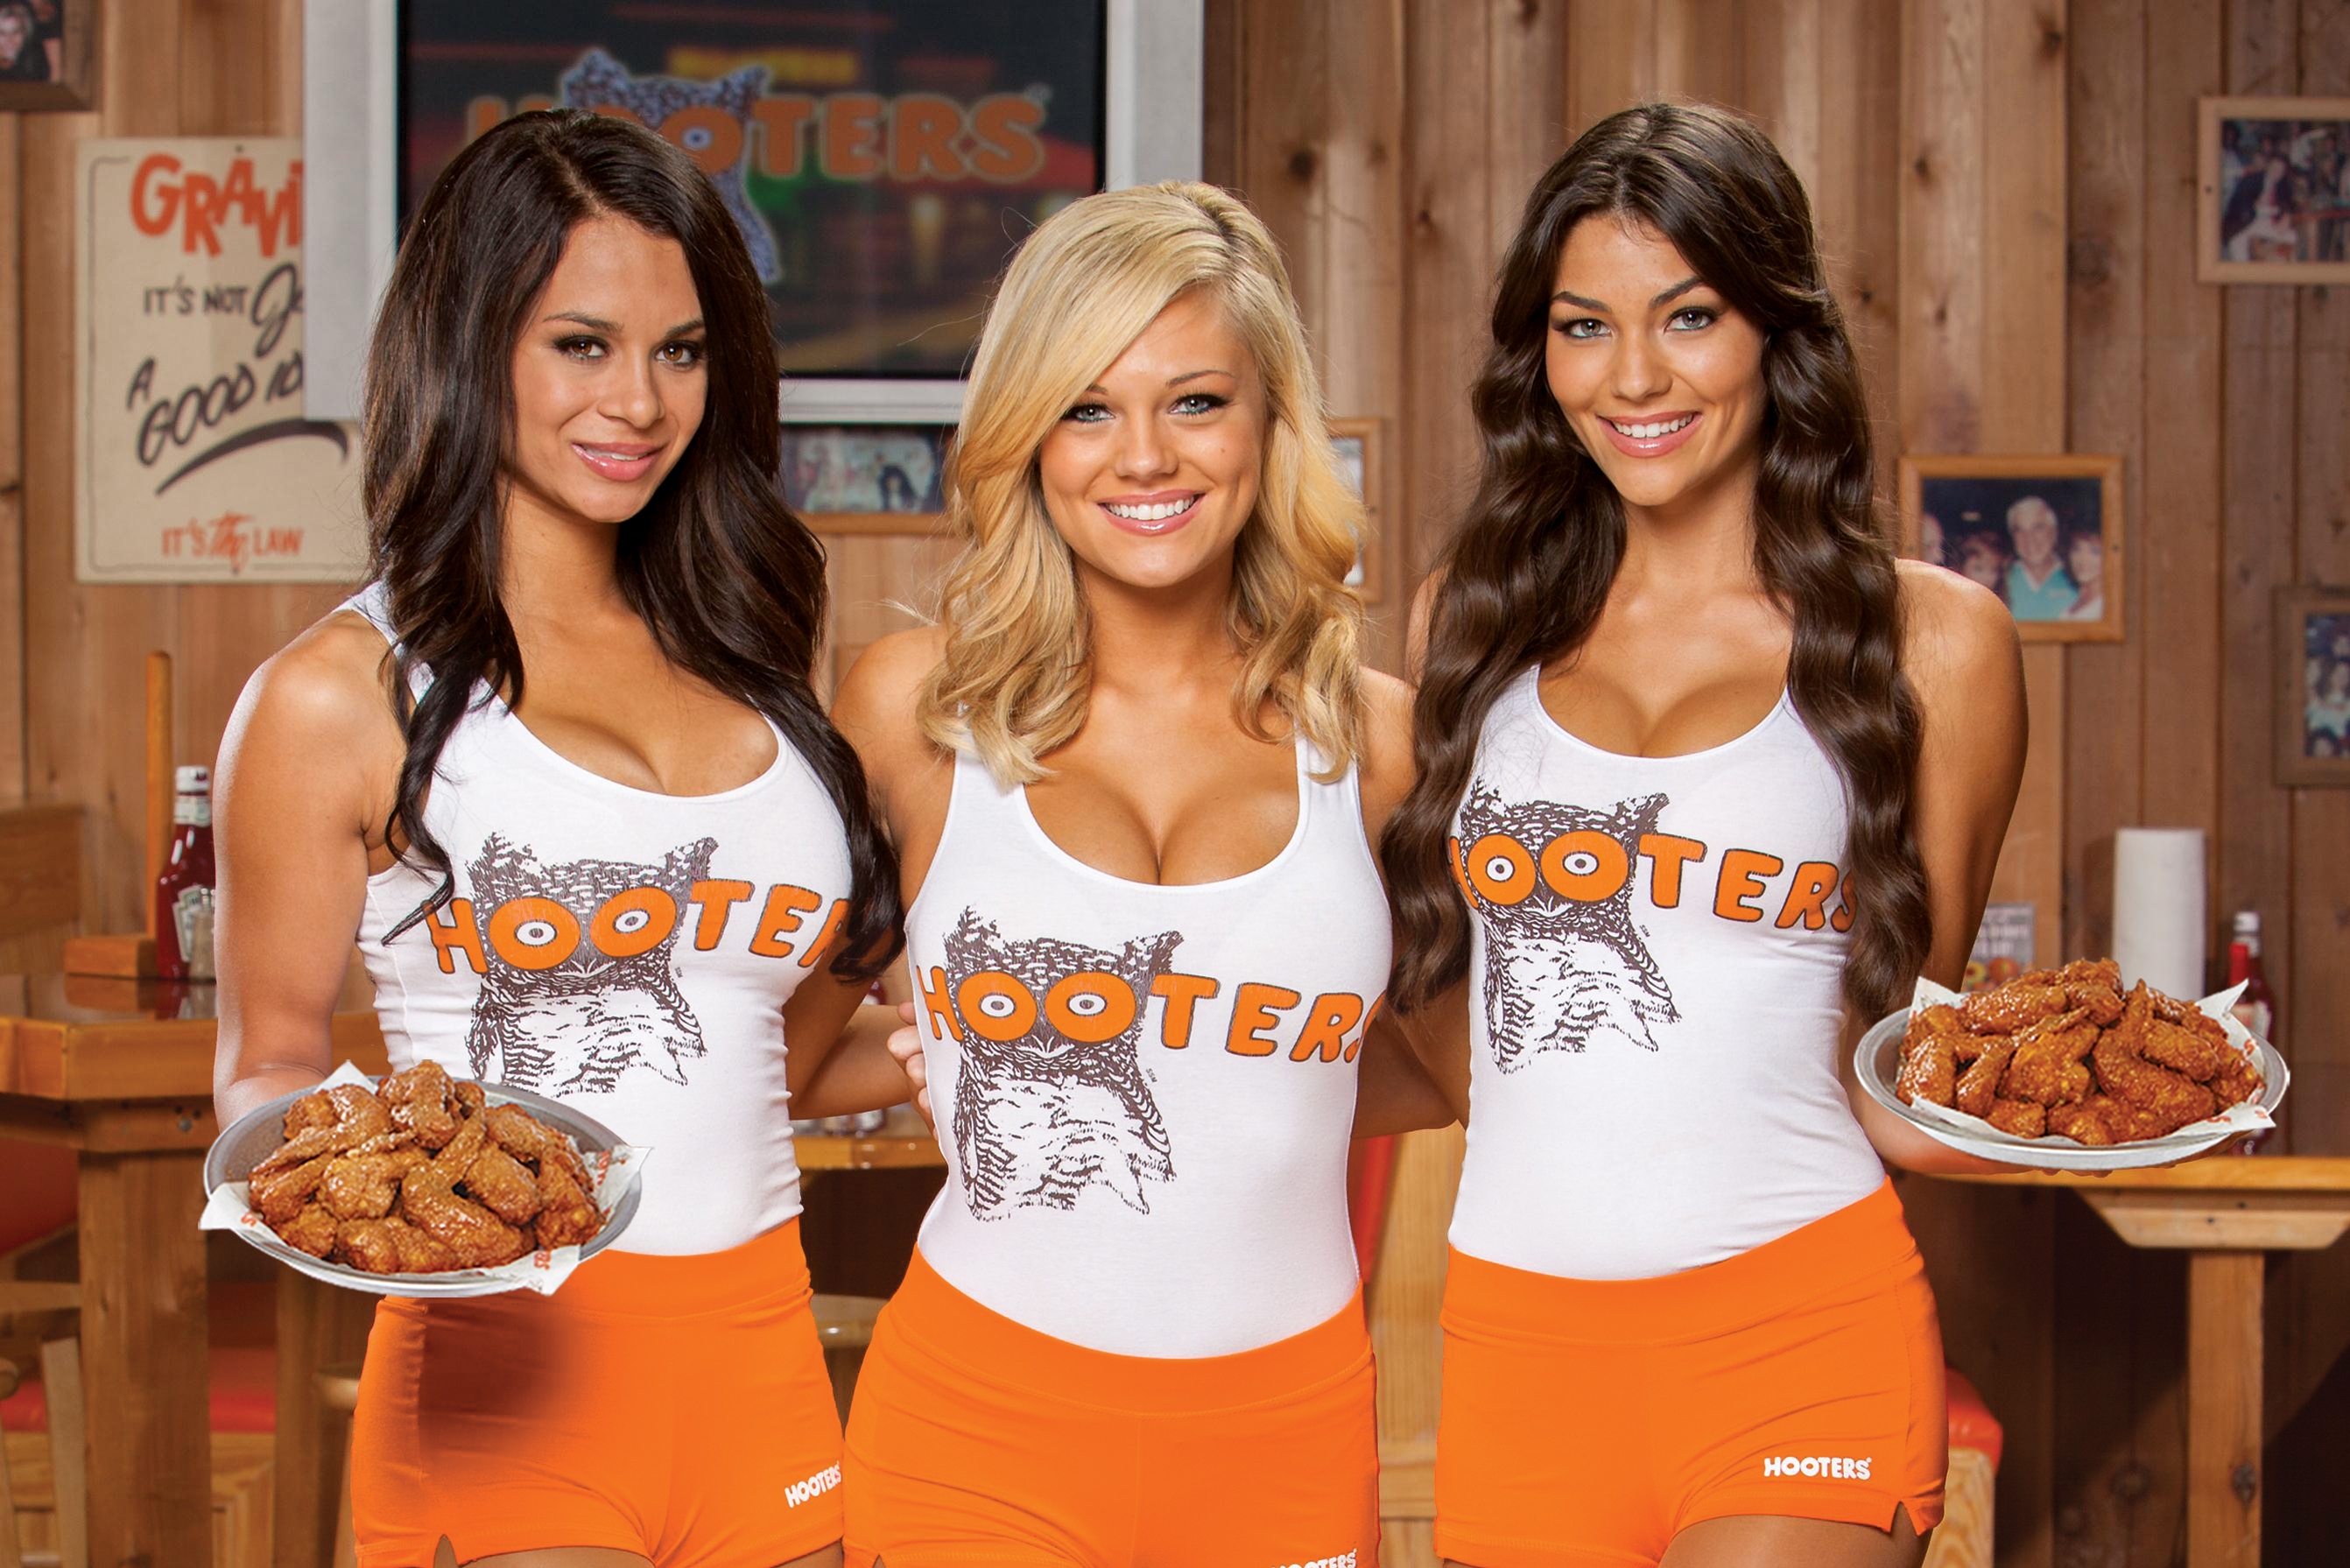 hooters bar - Cooter Ter Hooth